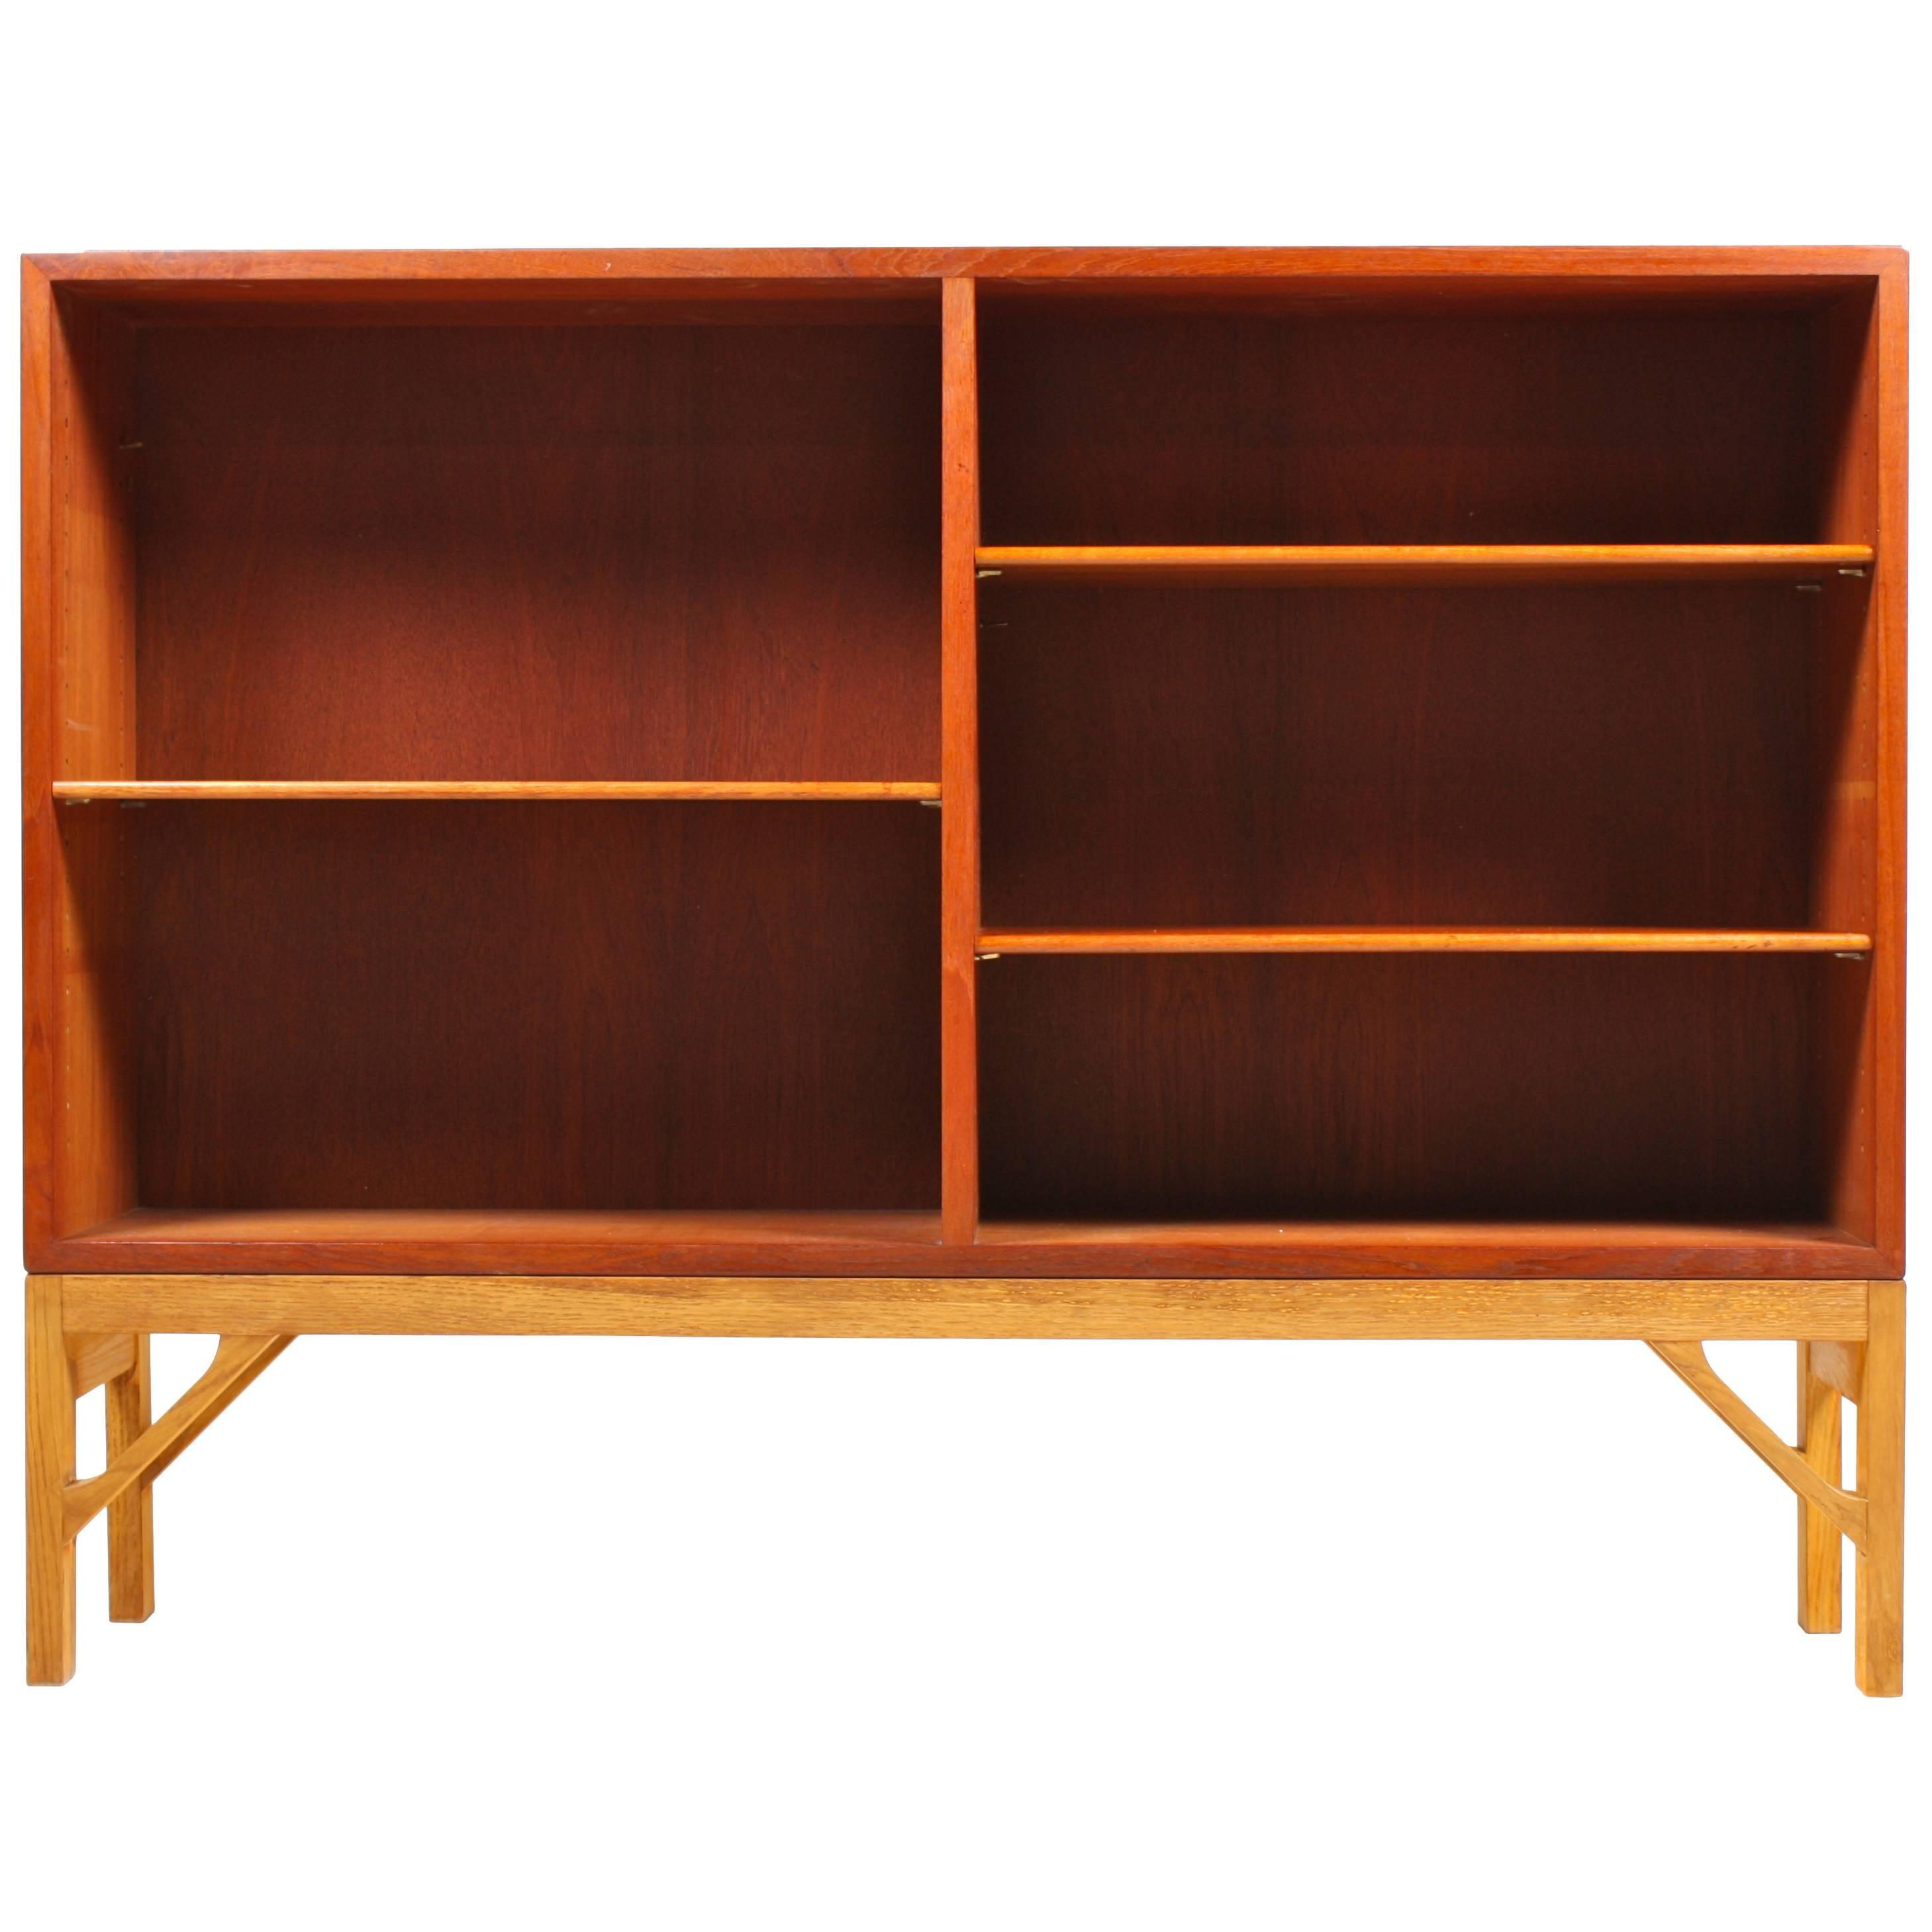 Low China bookcase in teak on a solid oak base. Designed by MAA. Børge Mogensen in 1958, this piece is made by CM Madsen cabinetmakers Denmark in the 1960s. Great original condition. More shelves available.